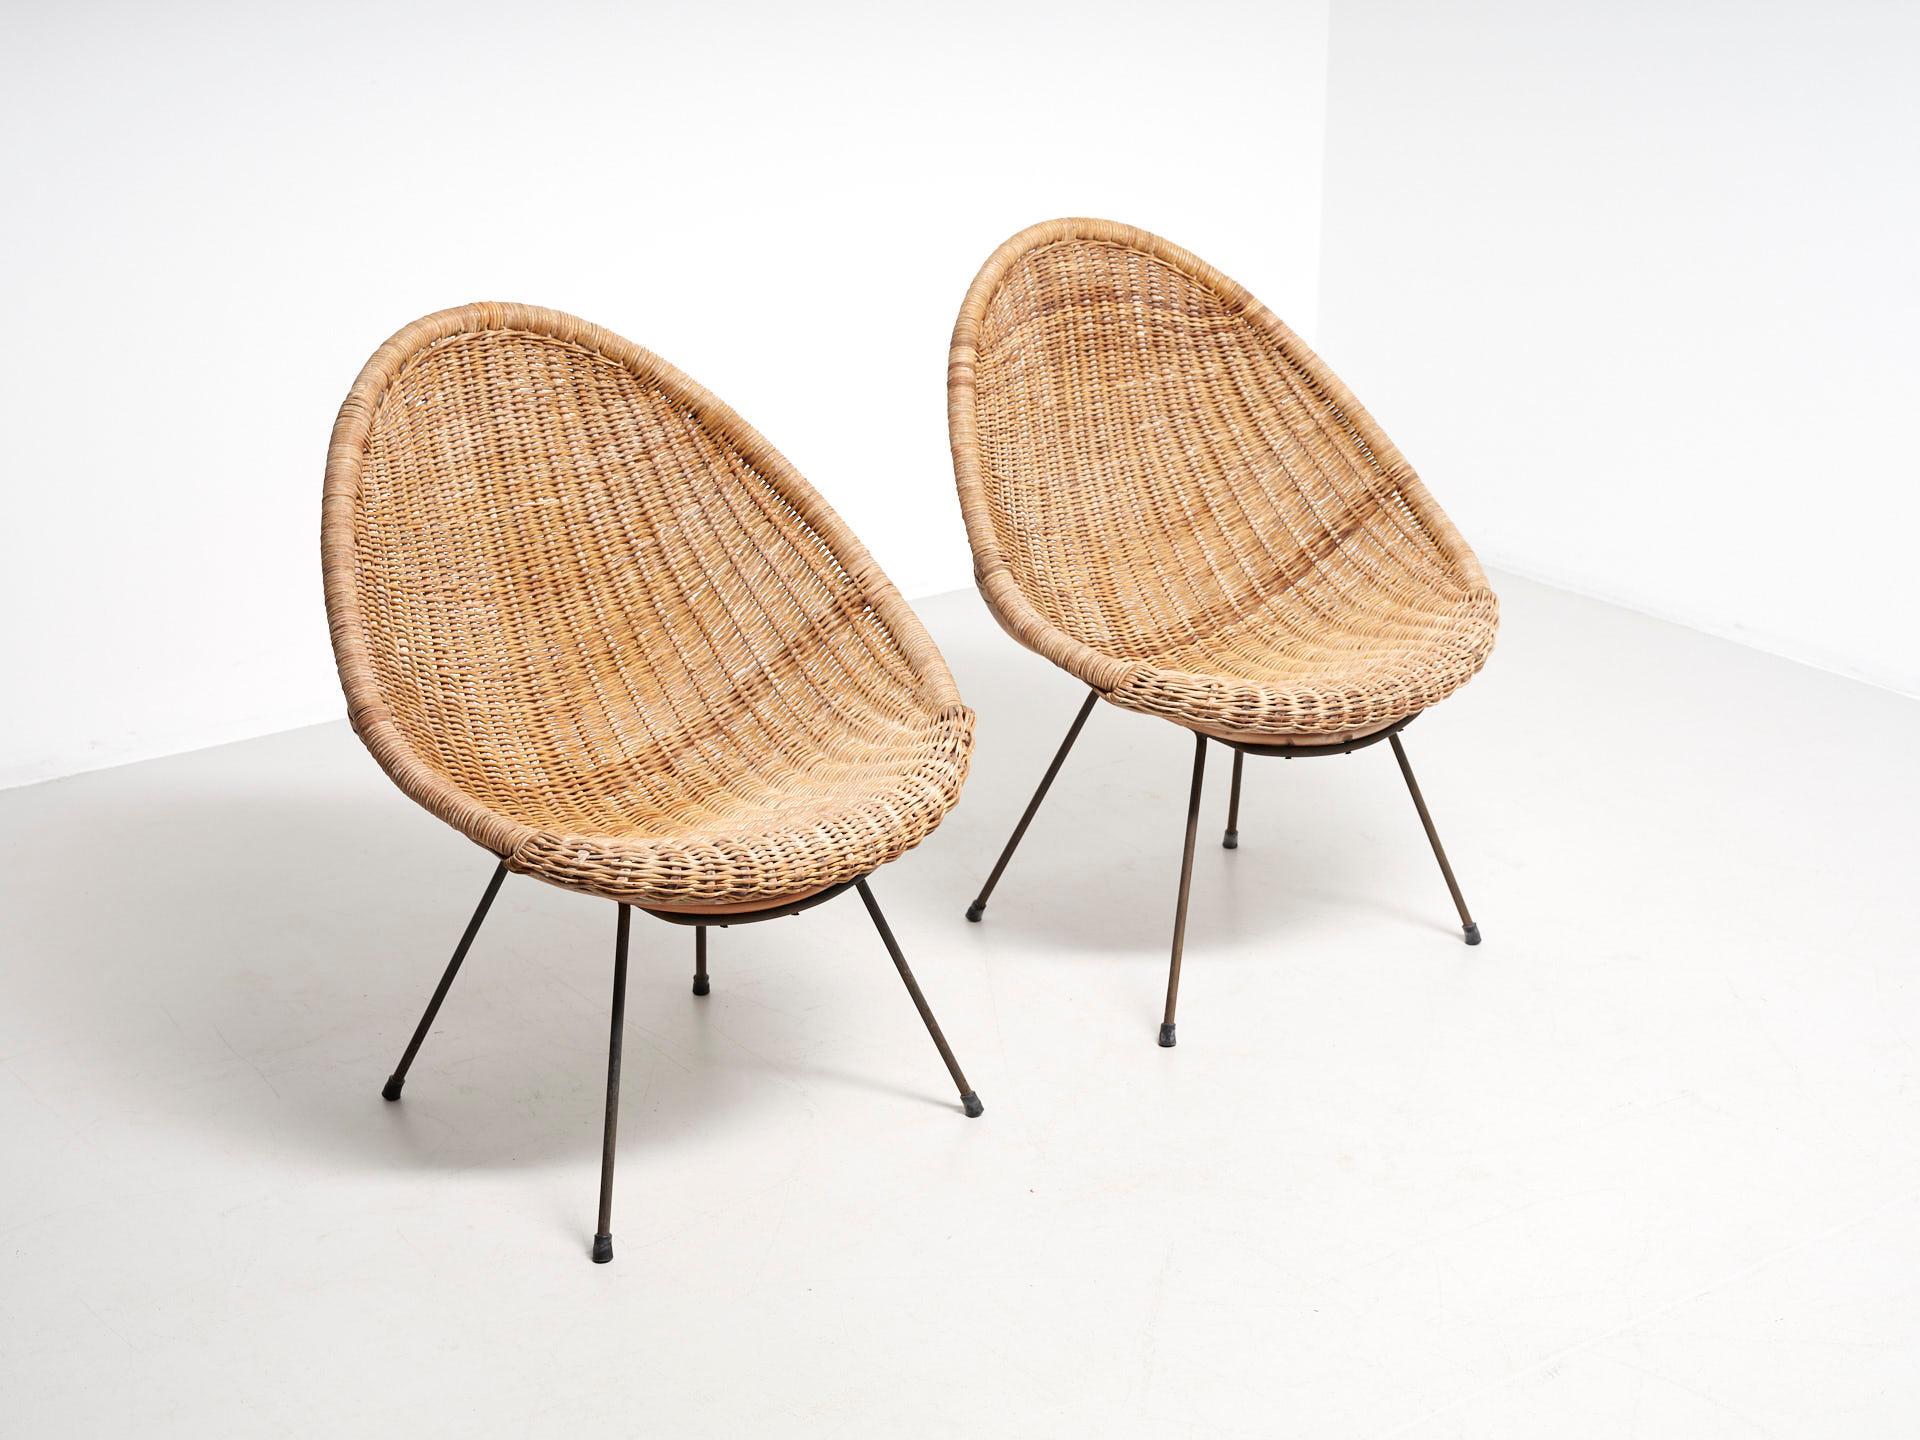 A pair Italian design rattan/wicker 'basket' chairs from the 1950s. With minimalistic metal frame. Inspired by Roberto Mango.